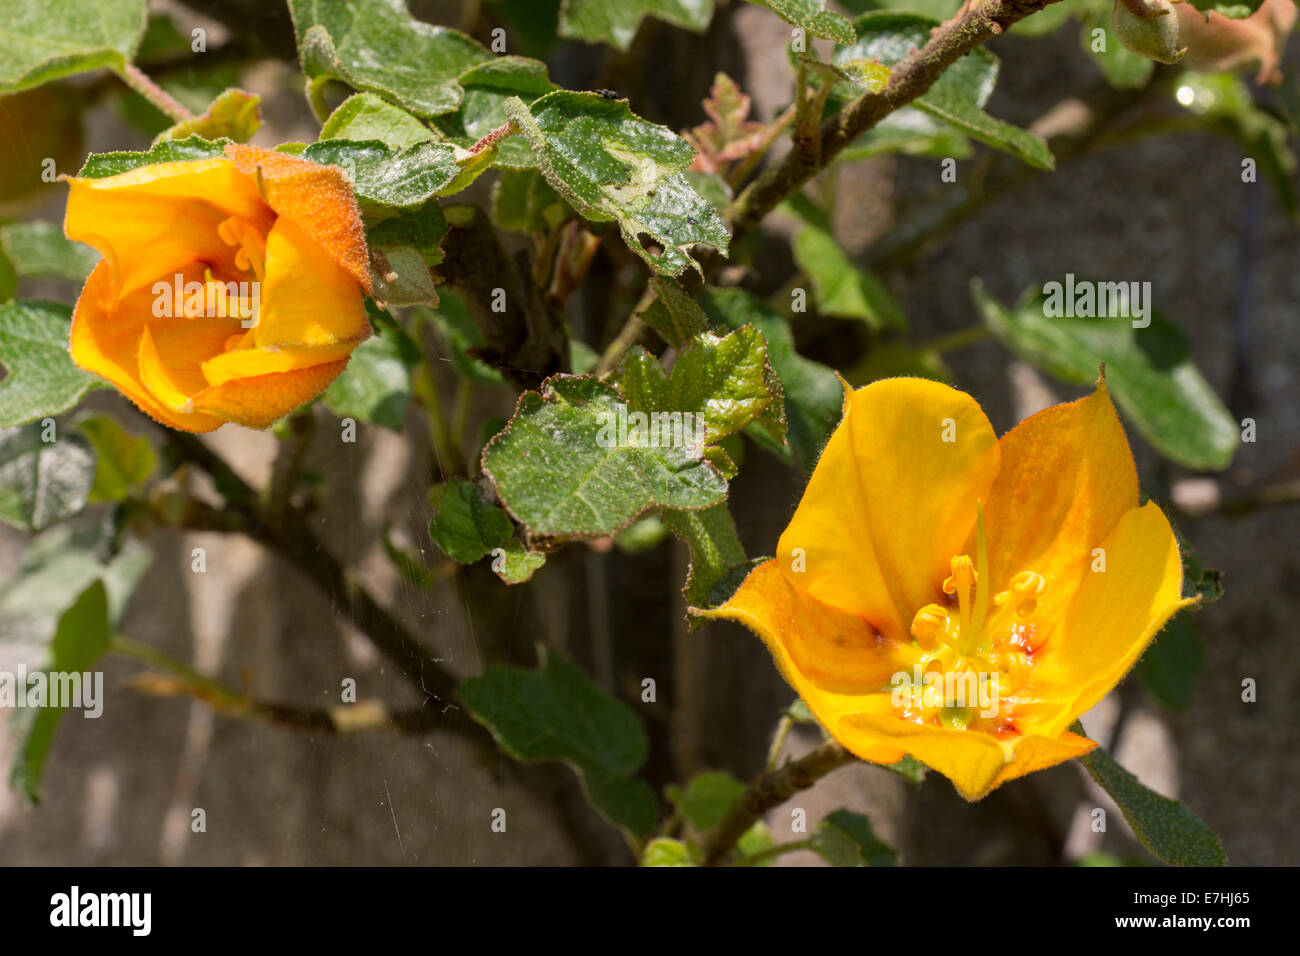 Flowers and foliage of Fremontodendron 'California Glory' grown as a wall shrub Stock Photo